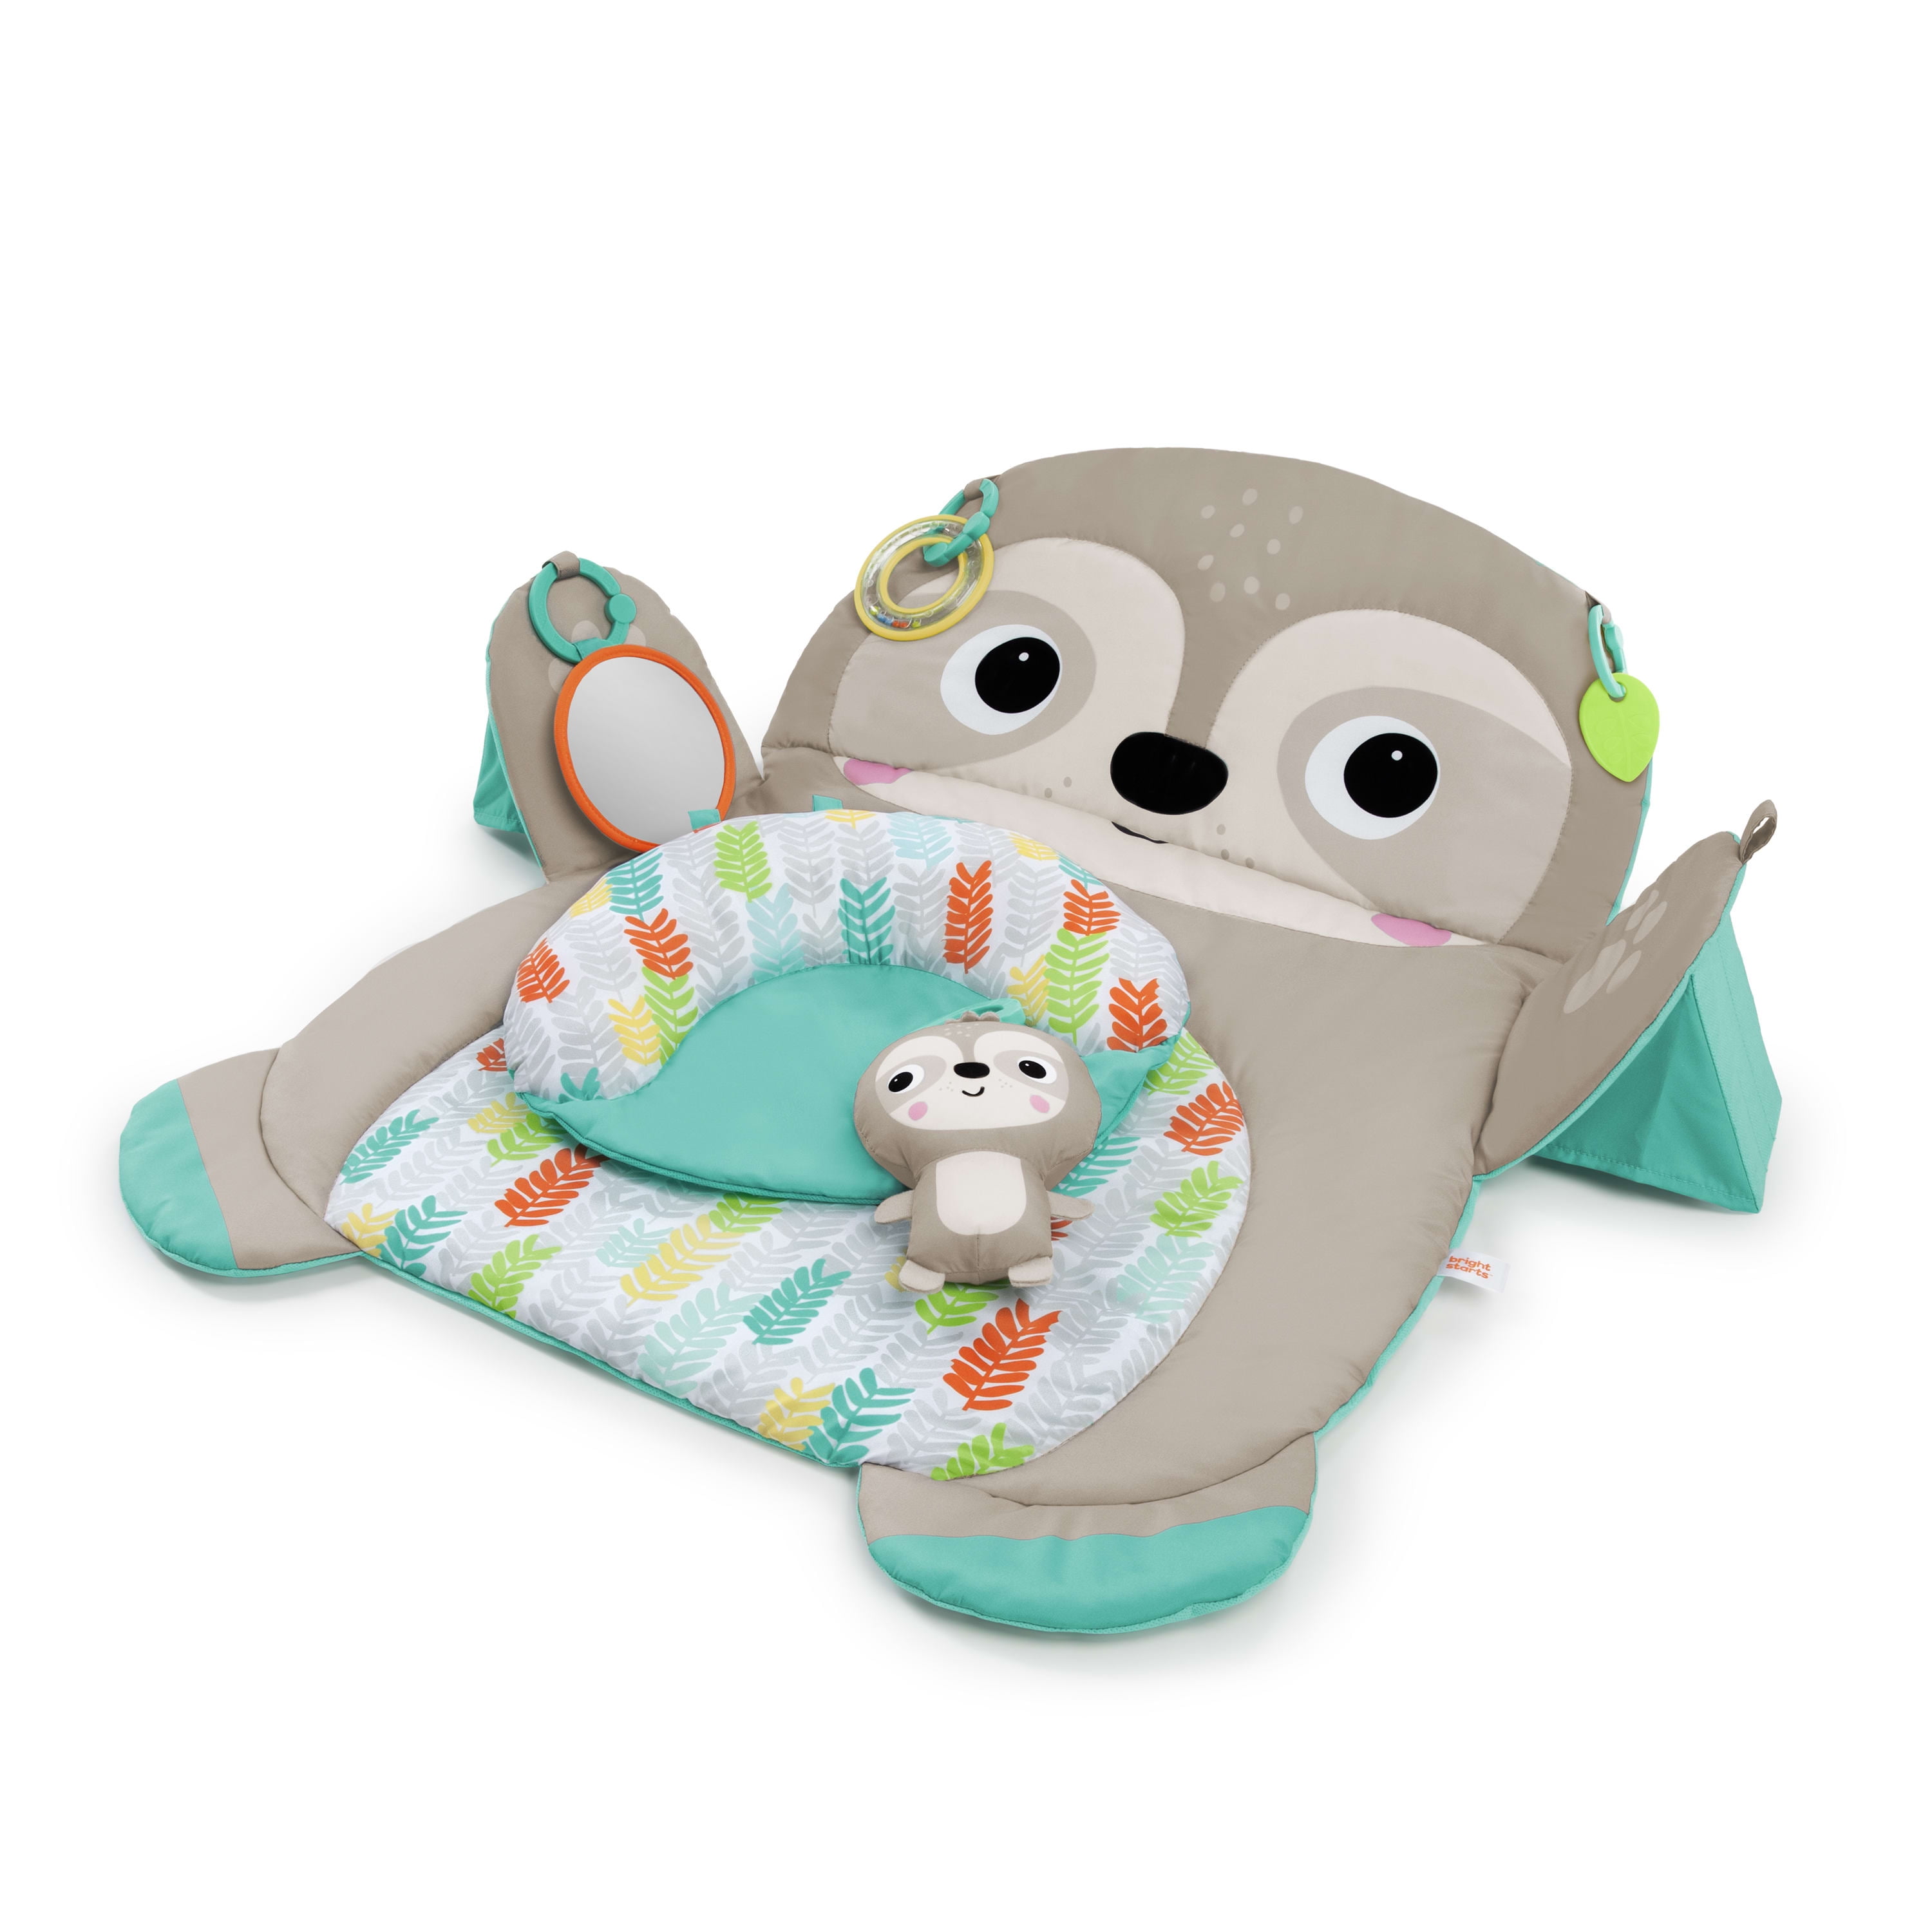 Owl Bright Starts Tummy Time Prop & Play Activity Mat Ages Newborn 